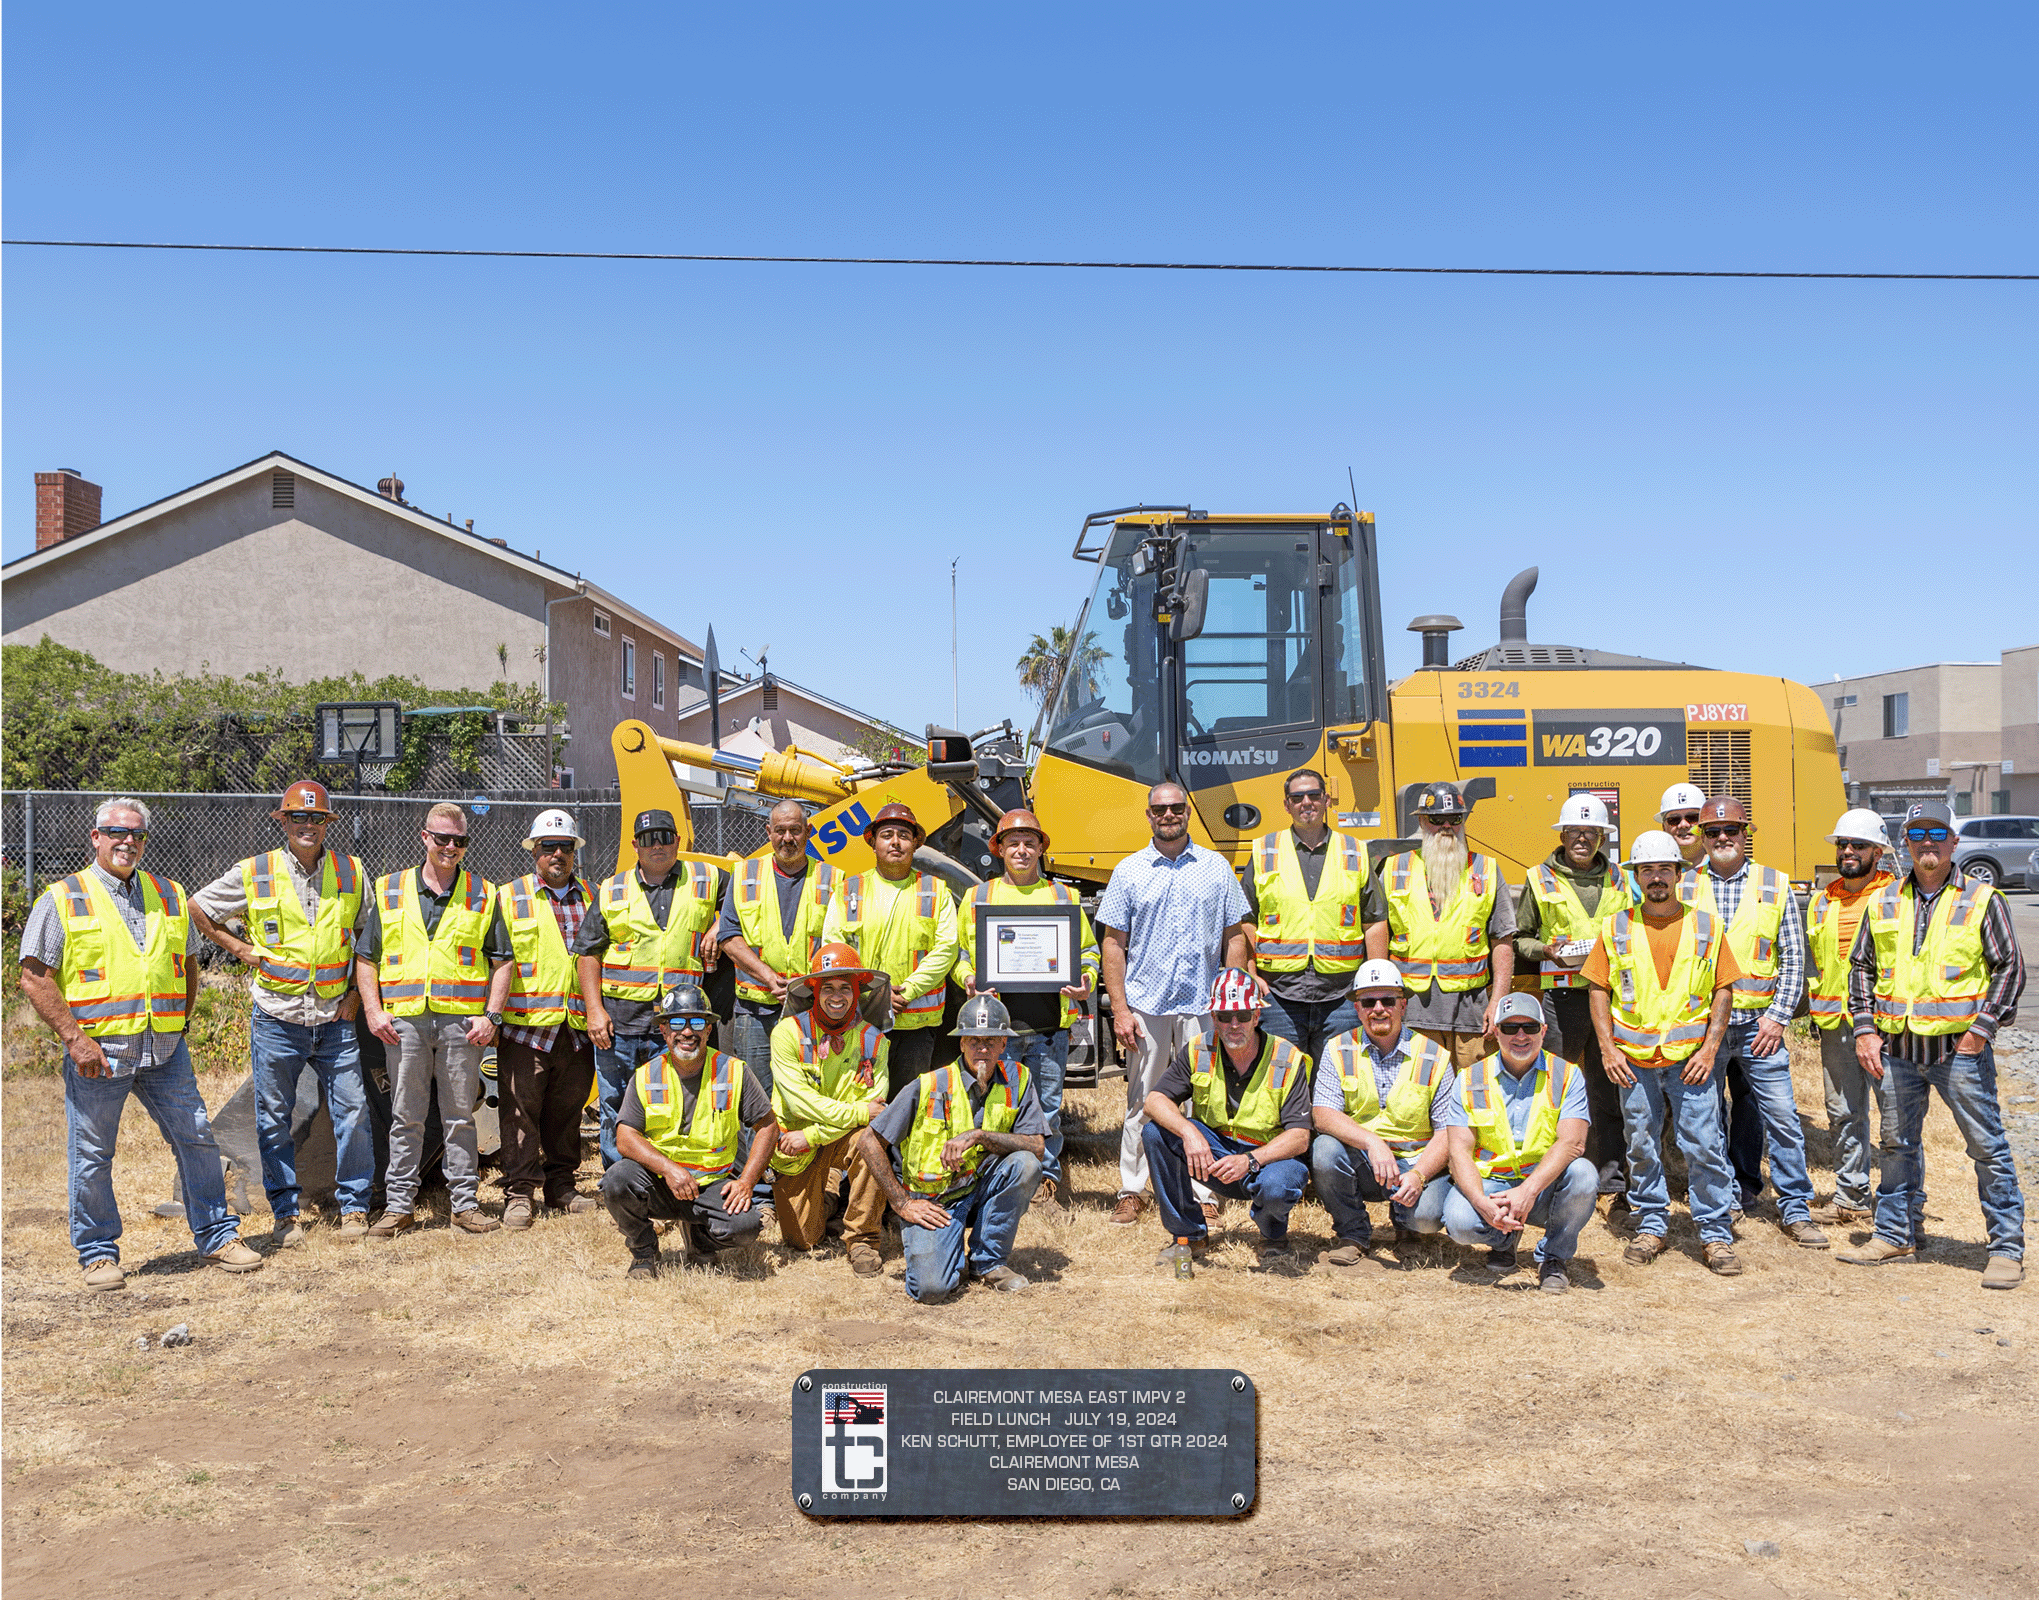 Group photo of crew in front of loader machine on jobsite